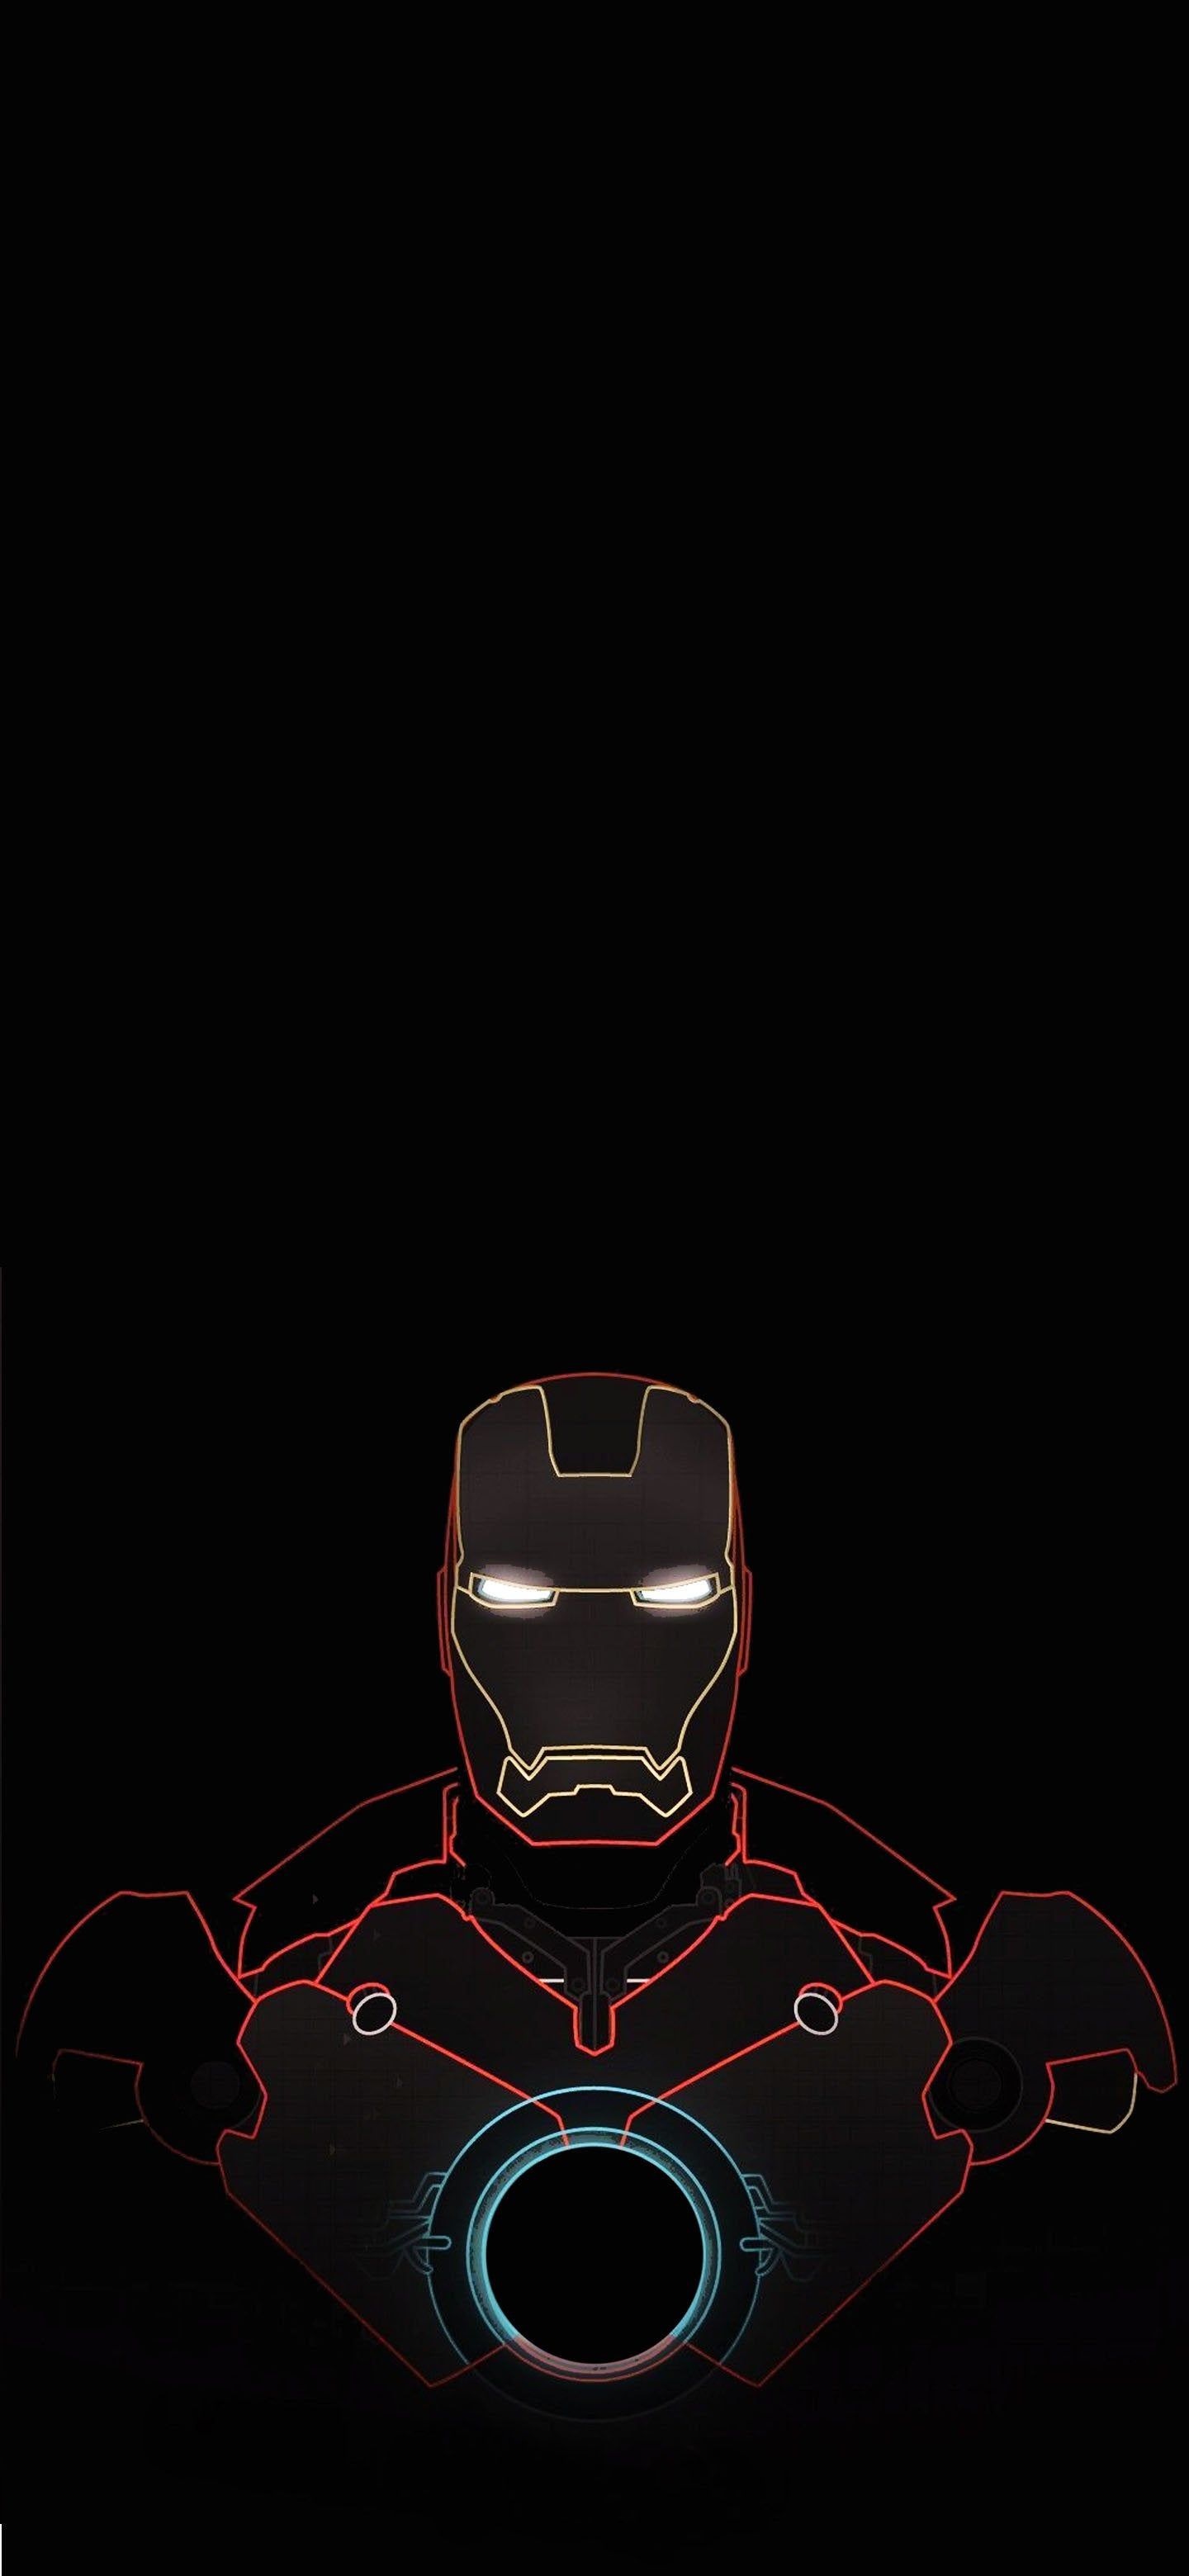 Can someone align this iron man lock screen wallpaper to